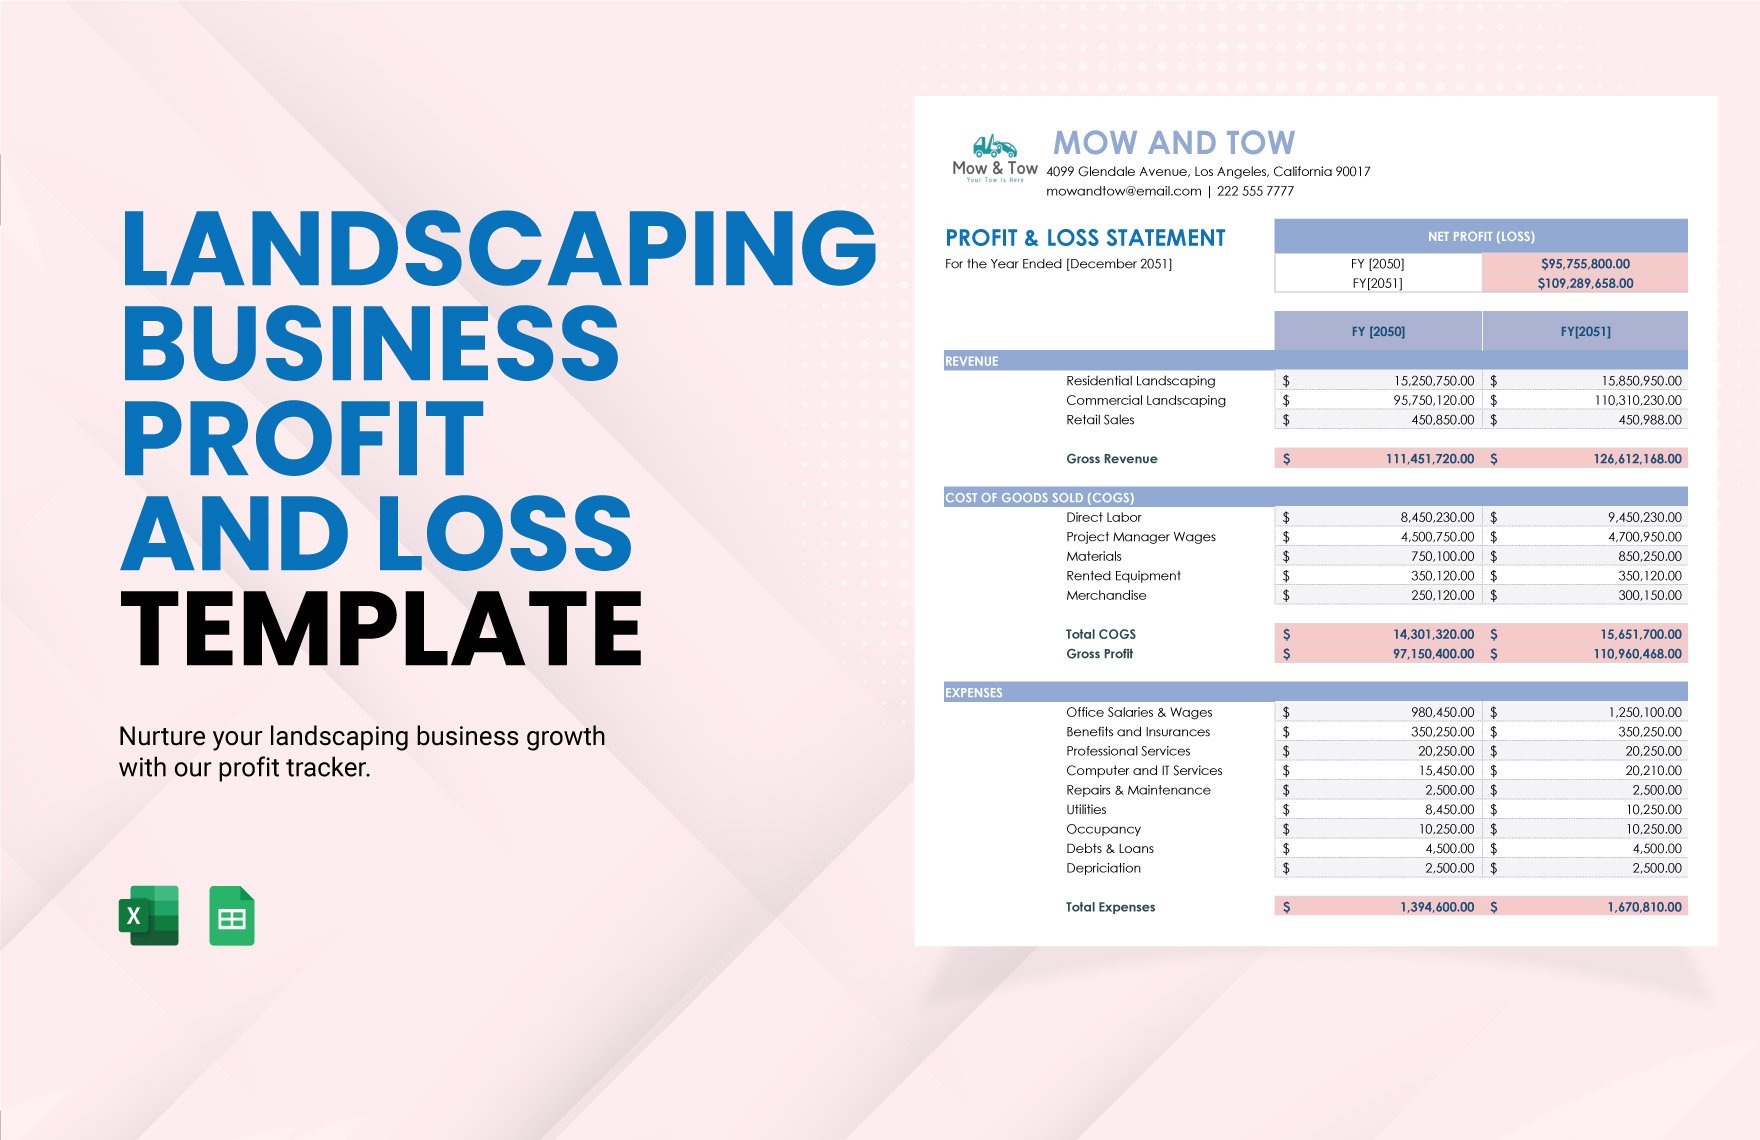 Landscaping Business Profit And Loss Template